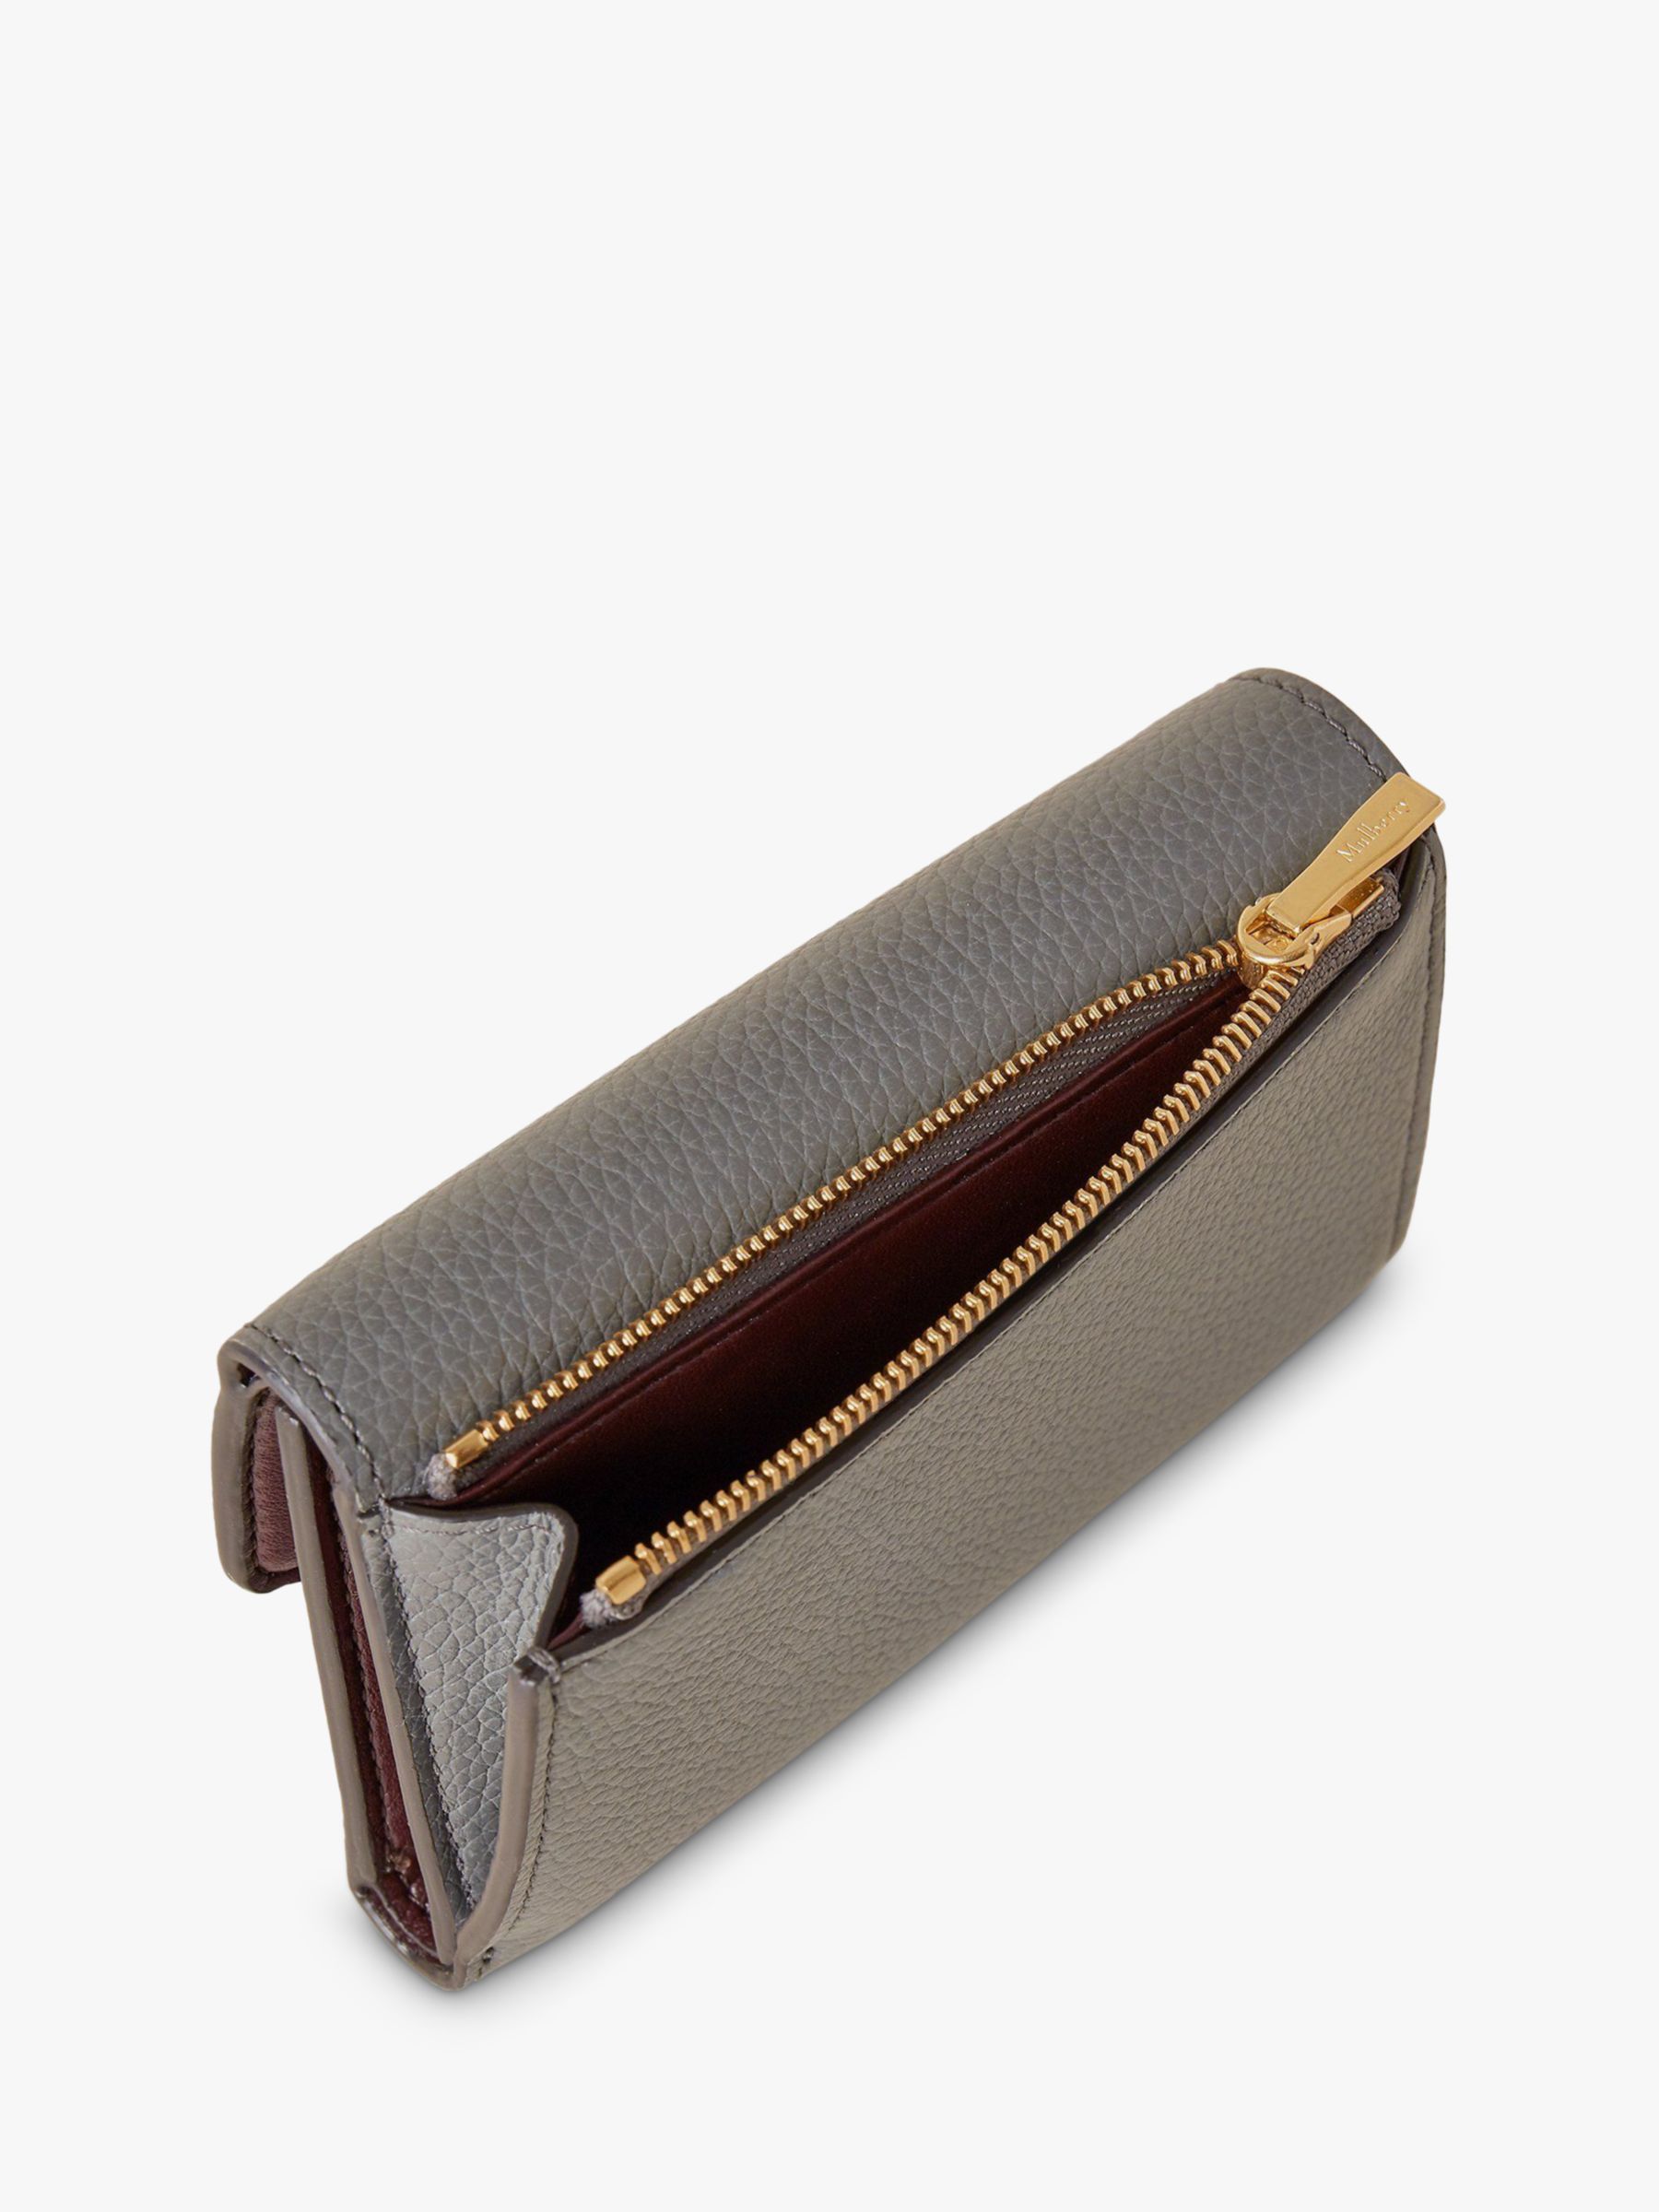 Buy Mulberry Darley Small Classic Grain Leather Folded Multi-Card Wallet Online at johnlewis.com